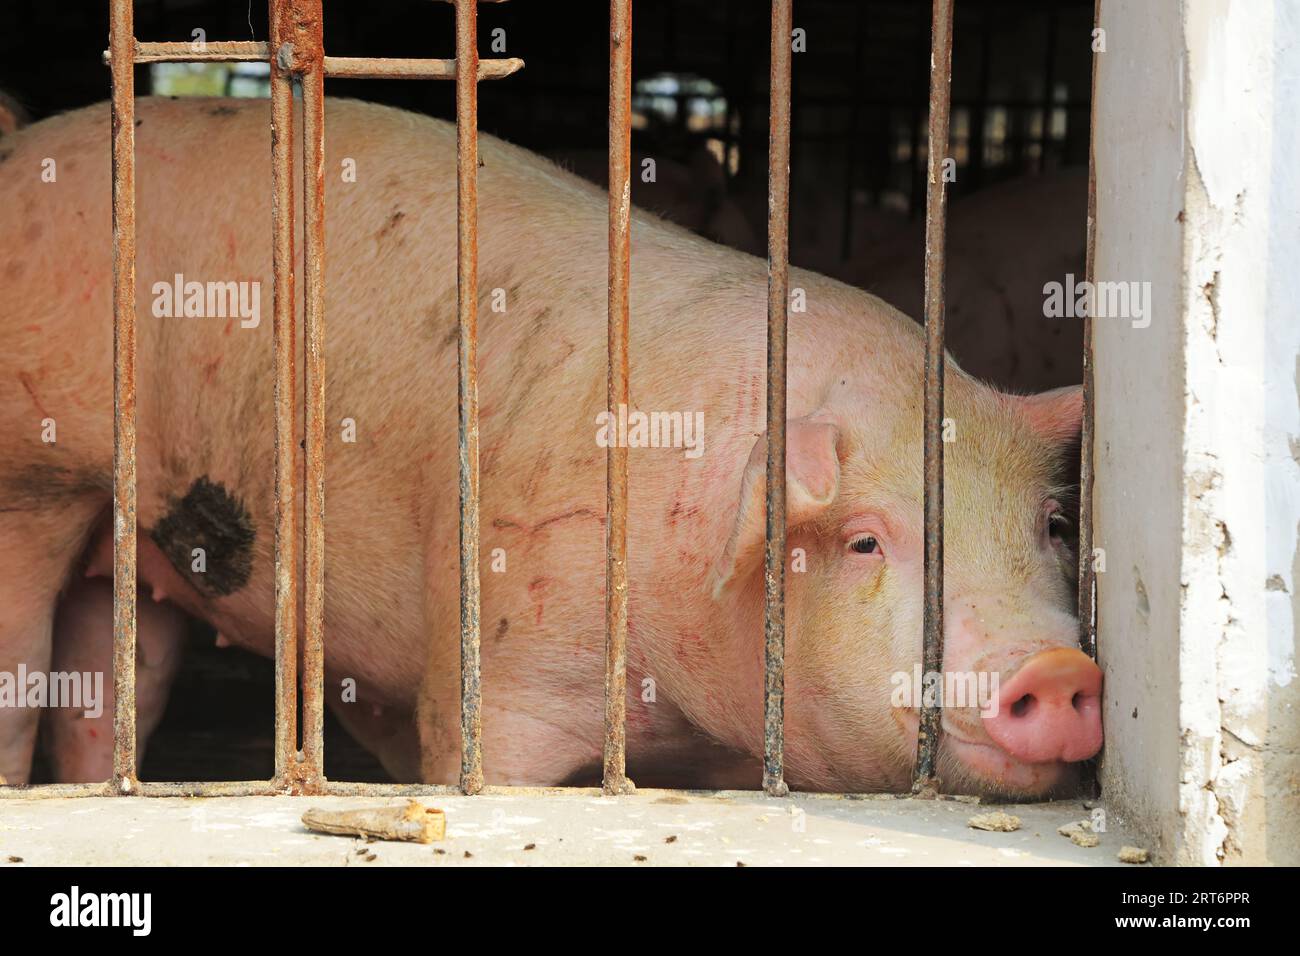 A fat pig looks out of the railing at a farm in China Stock Photo